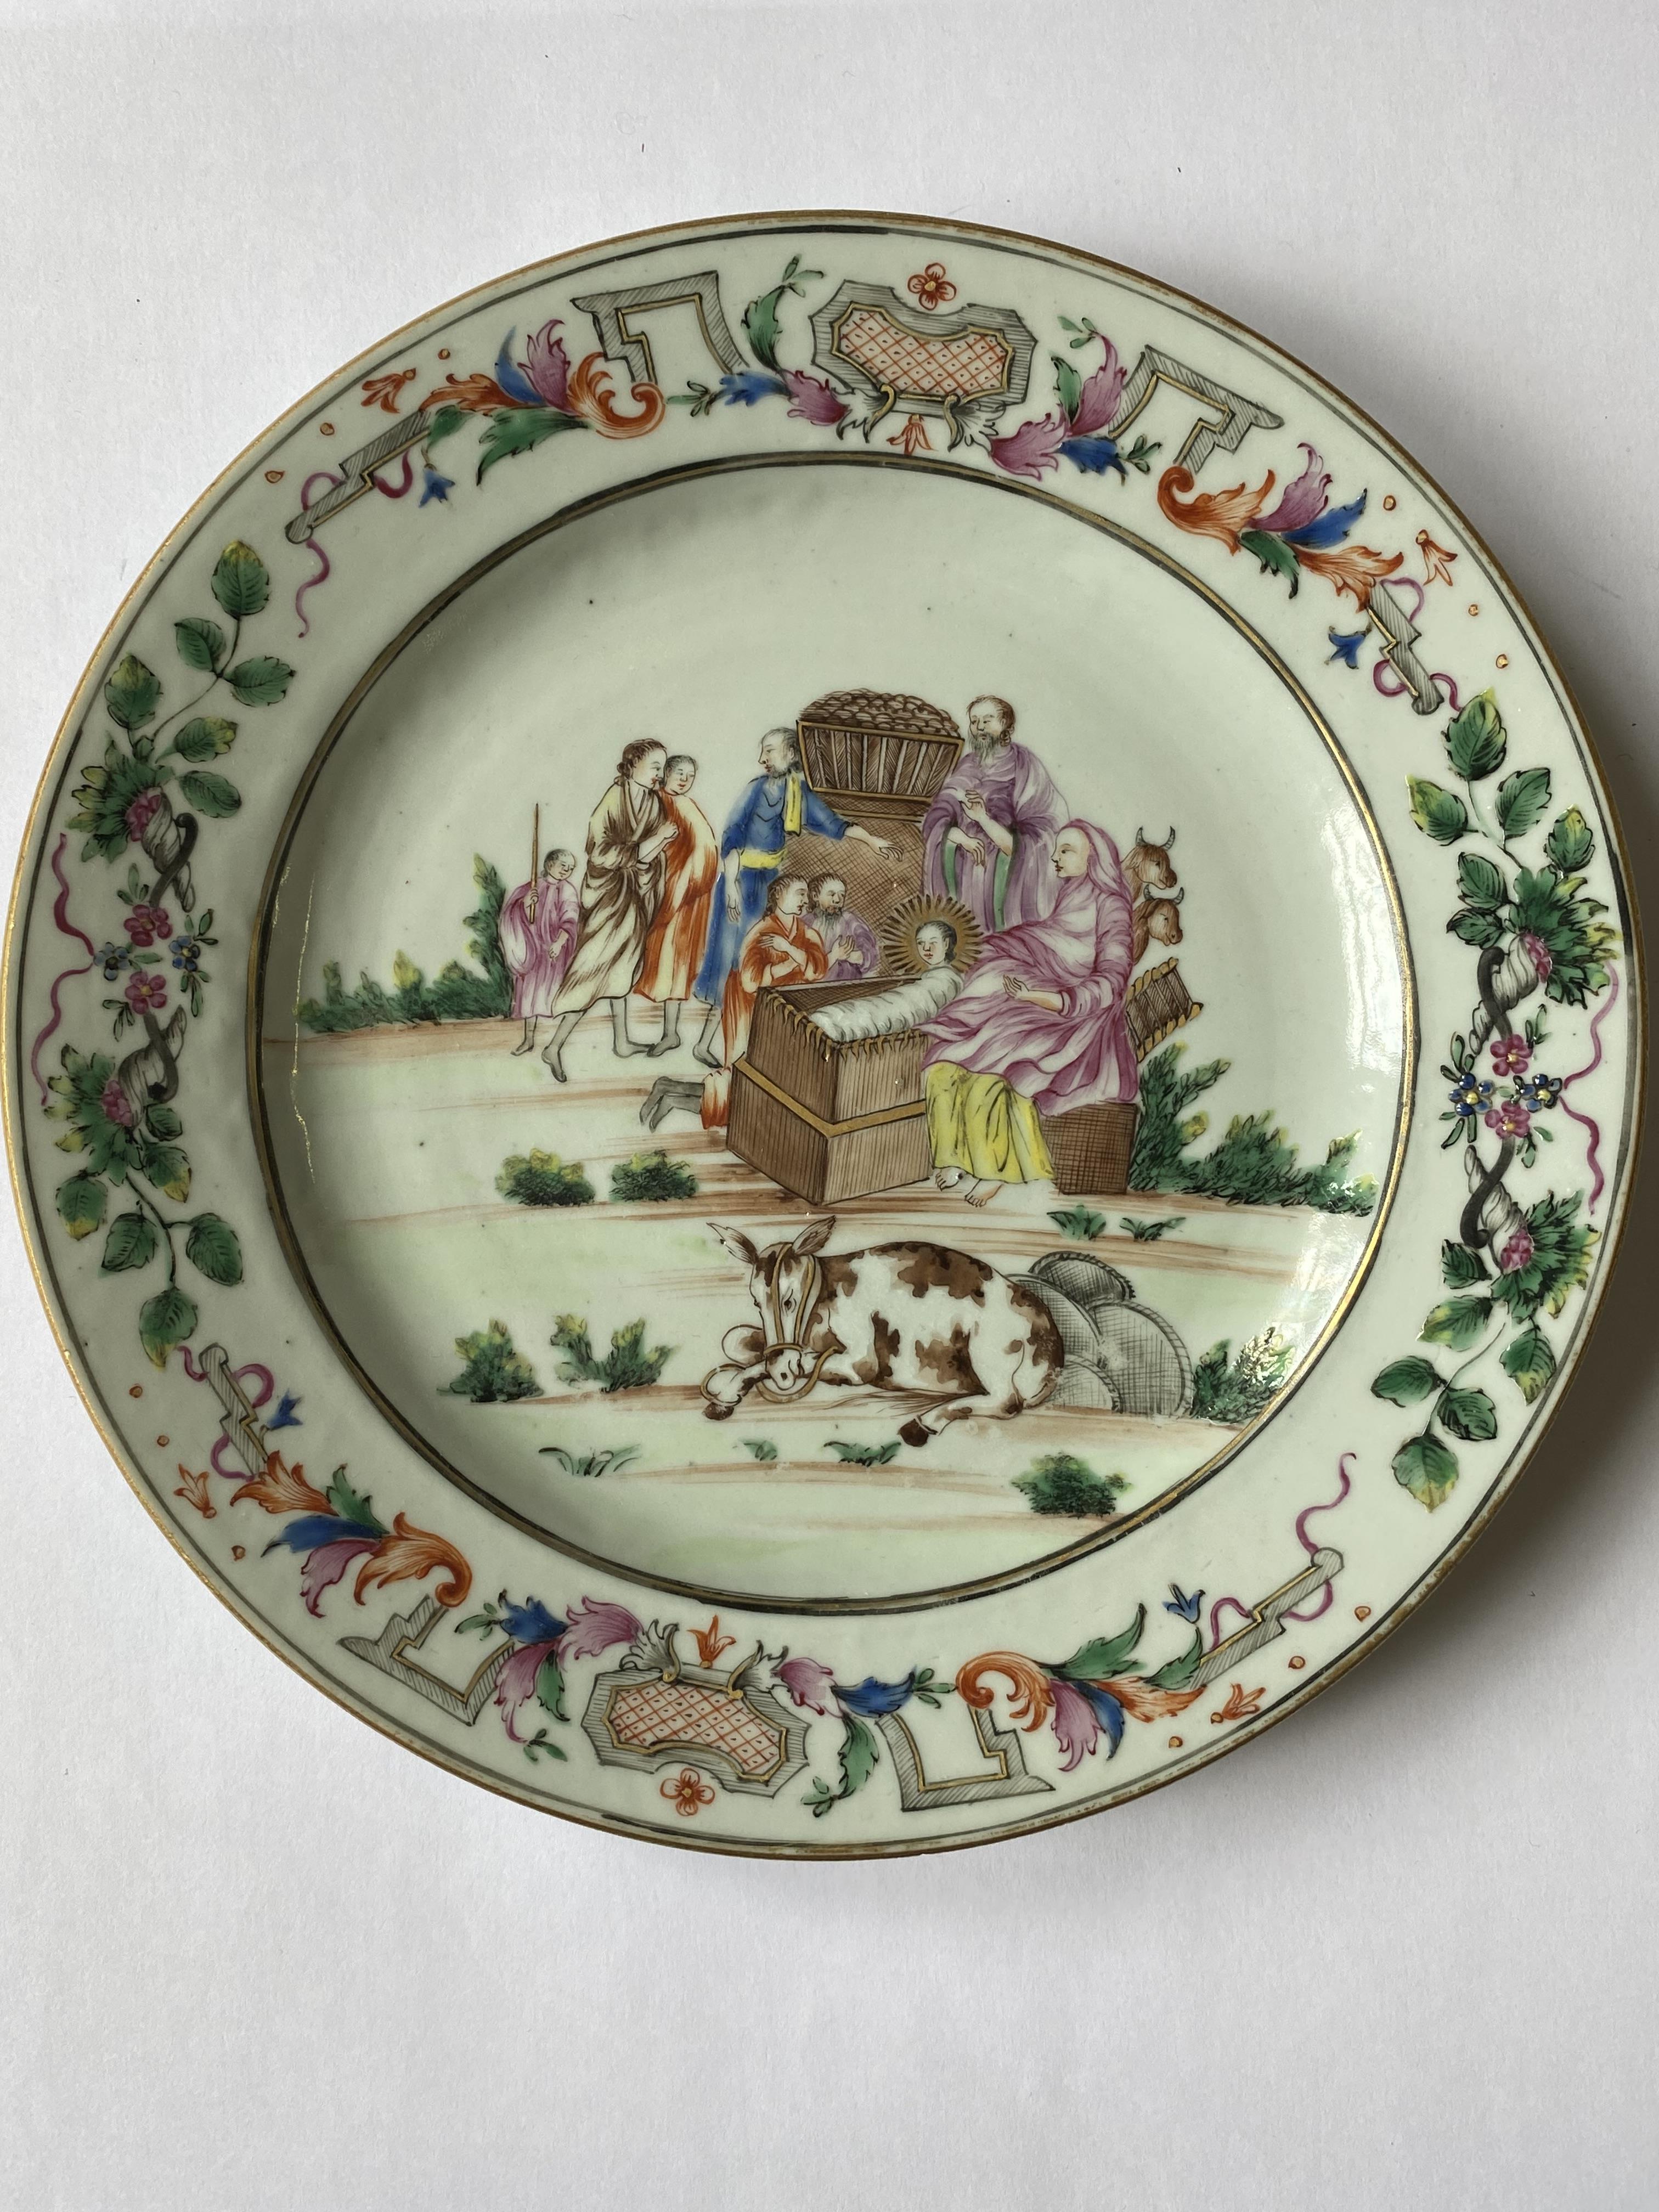 A CHINESE EXPORT PORCELAIN FAMILLE-ROSE 'NATIVITY' PLATE, 18TH CENTURY - Image 2 of 5